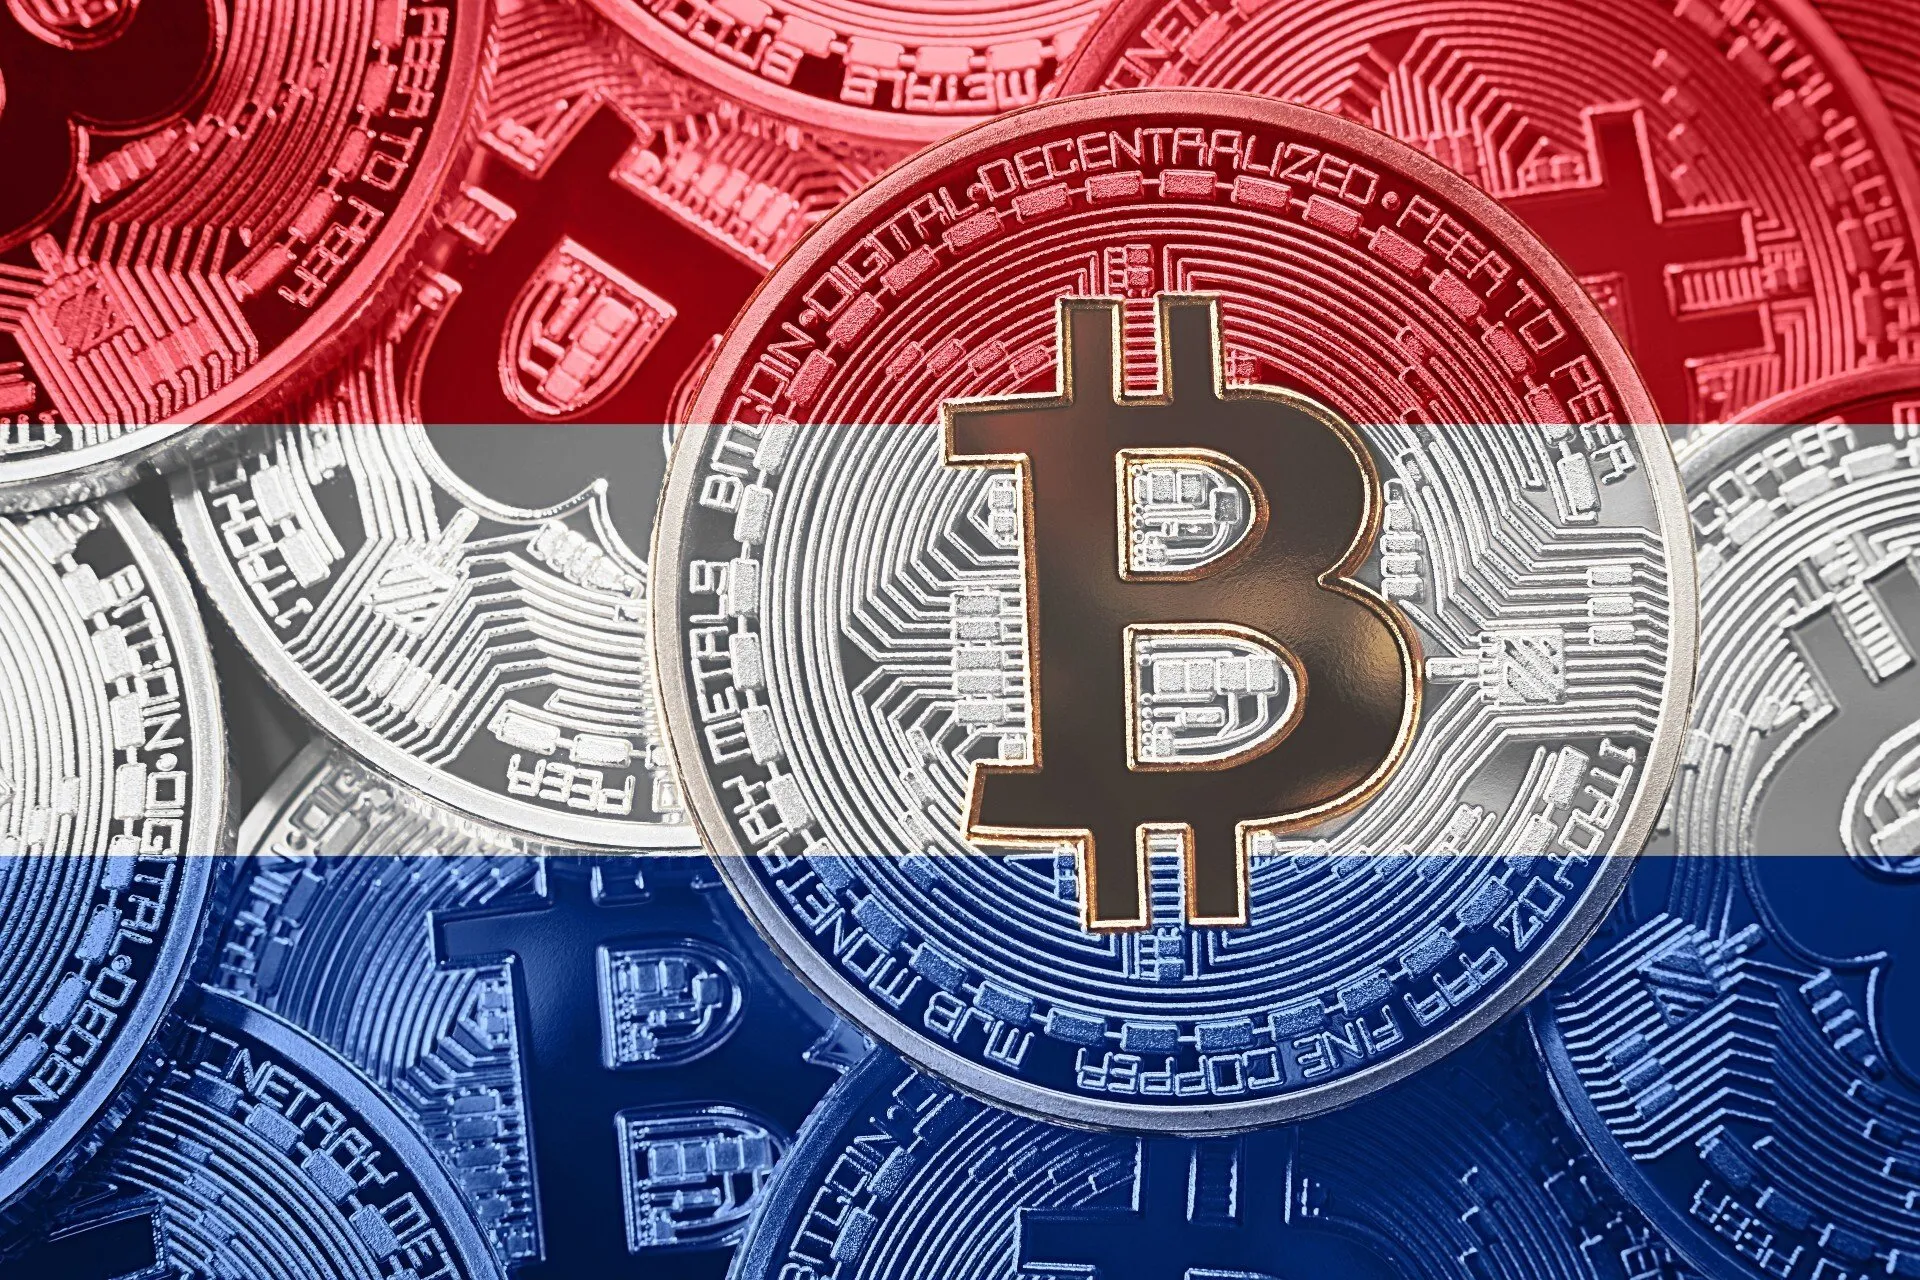 Dutch authorities seized almost $10 million worth of crypto. Image: Shutterstock.